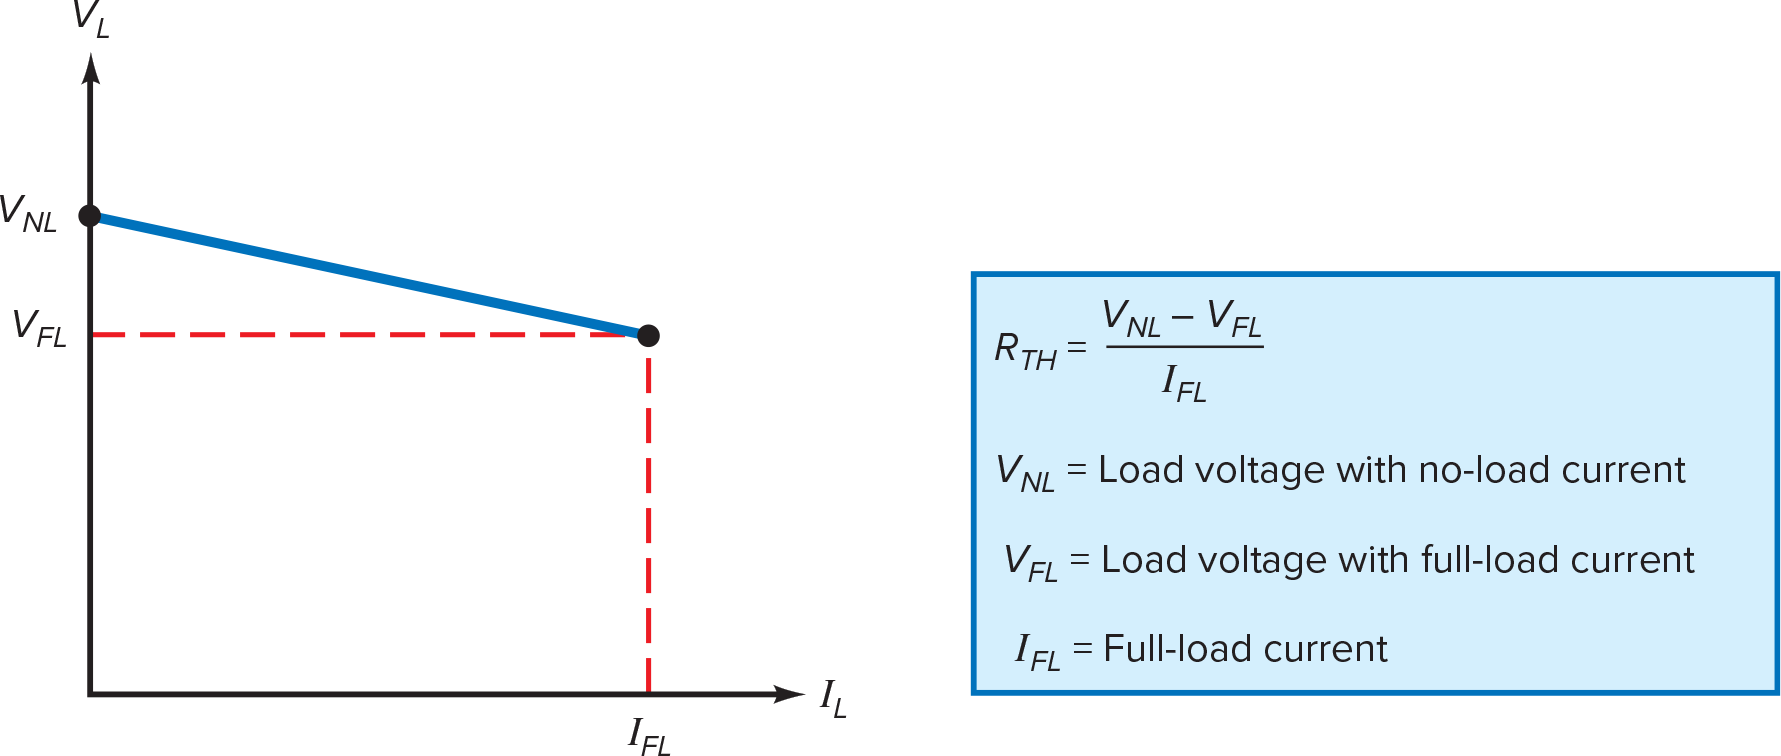 Graph of load voltage versus load current in power supply